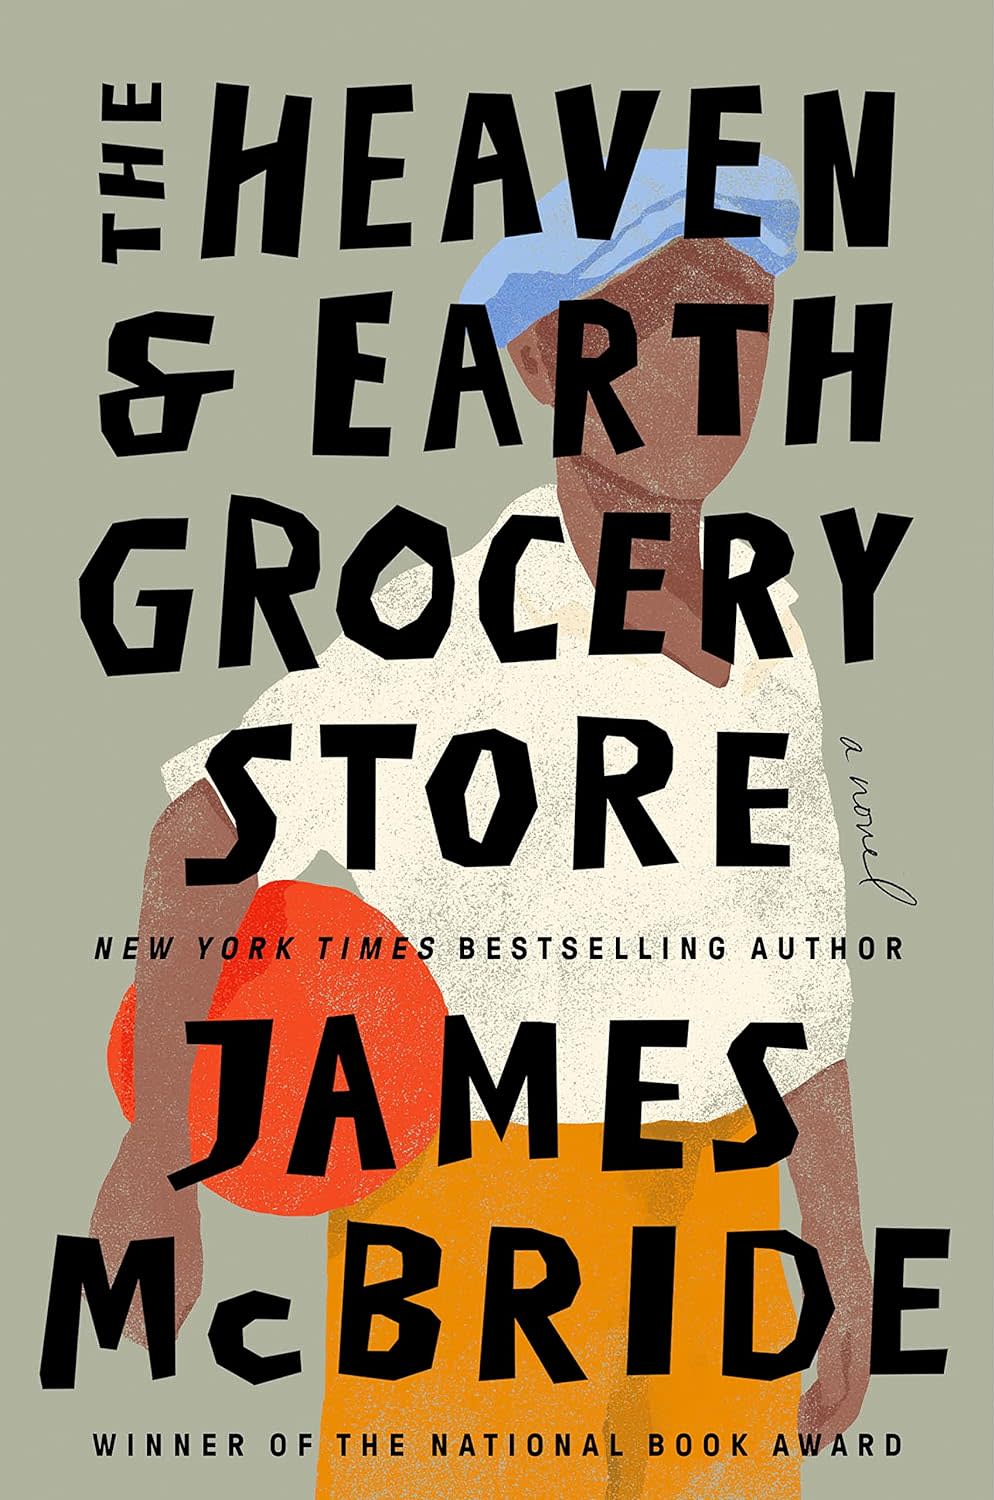 "The Heaven & Earth Grocery Store," by James McBride